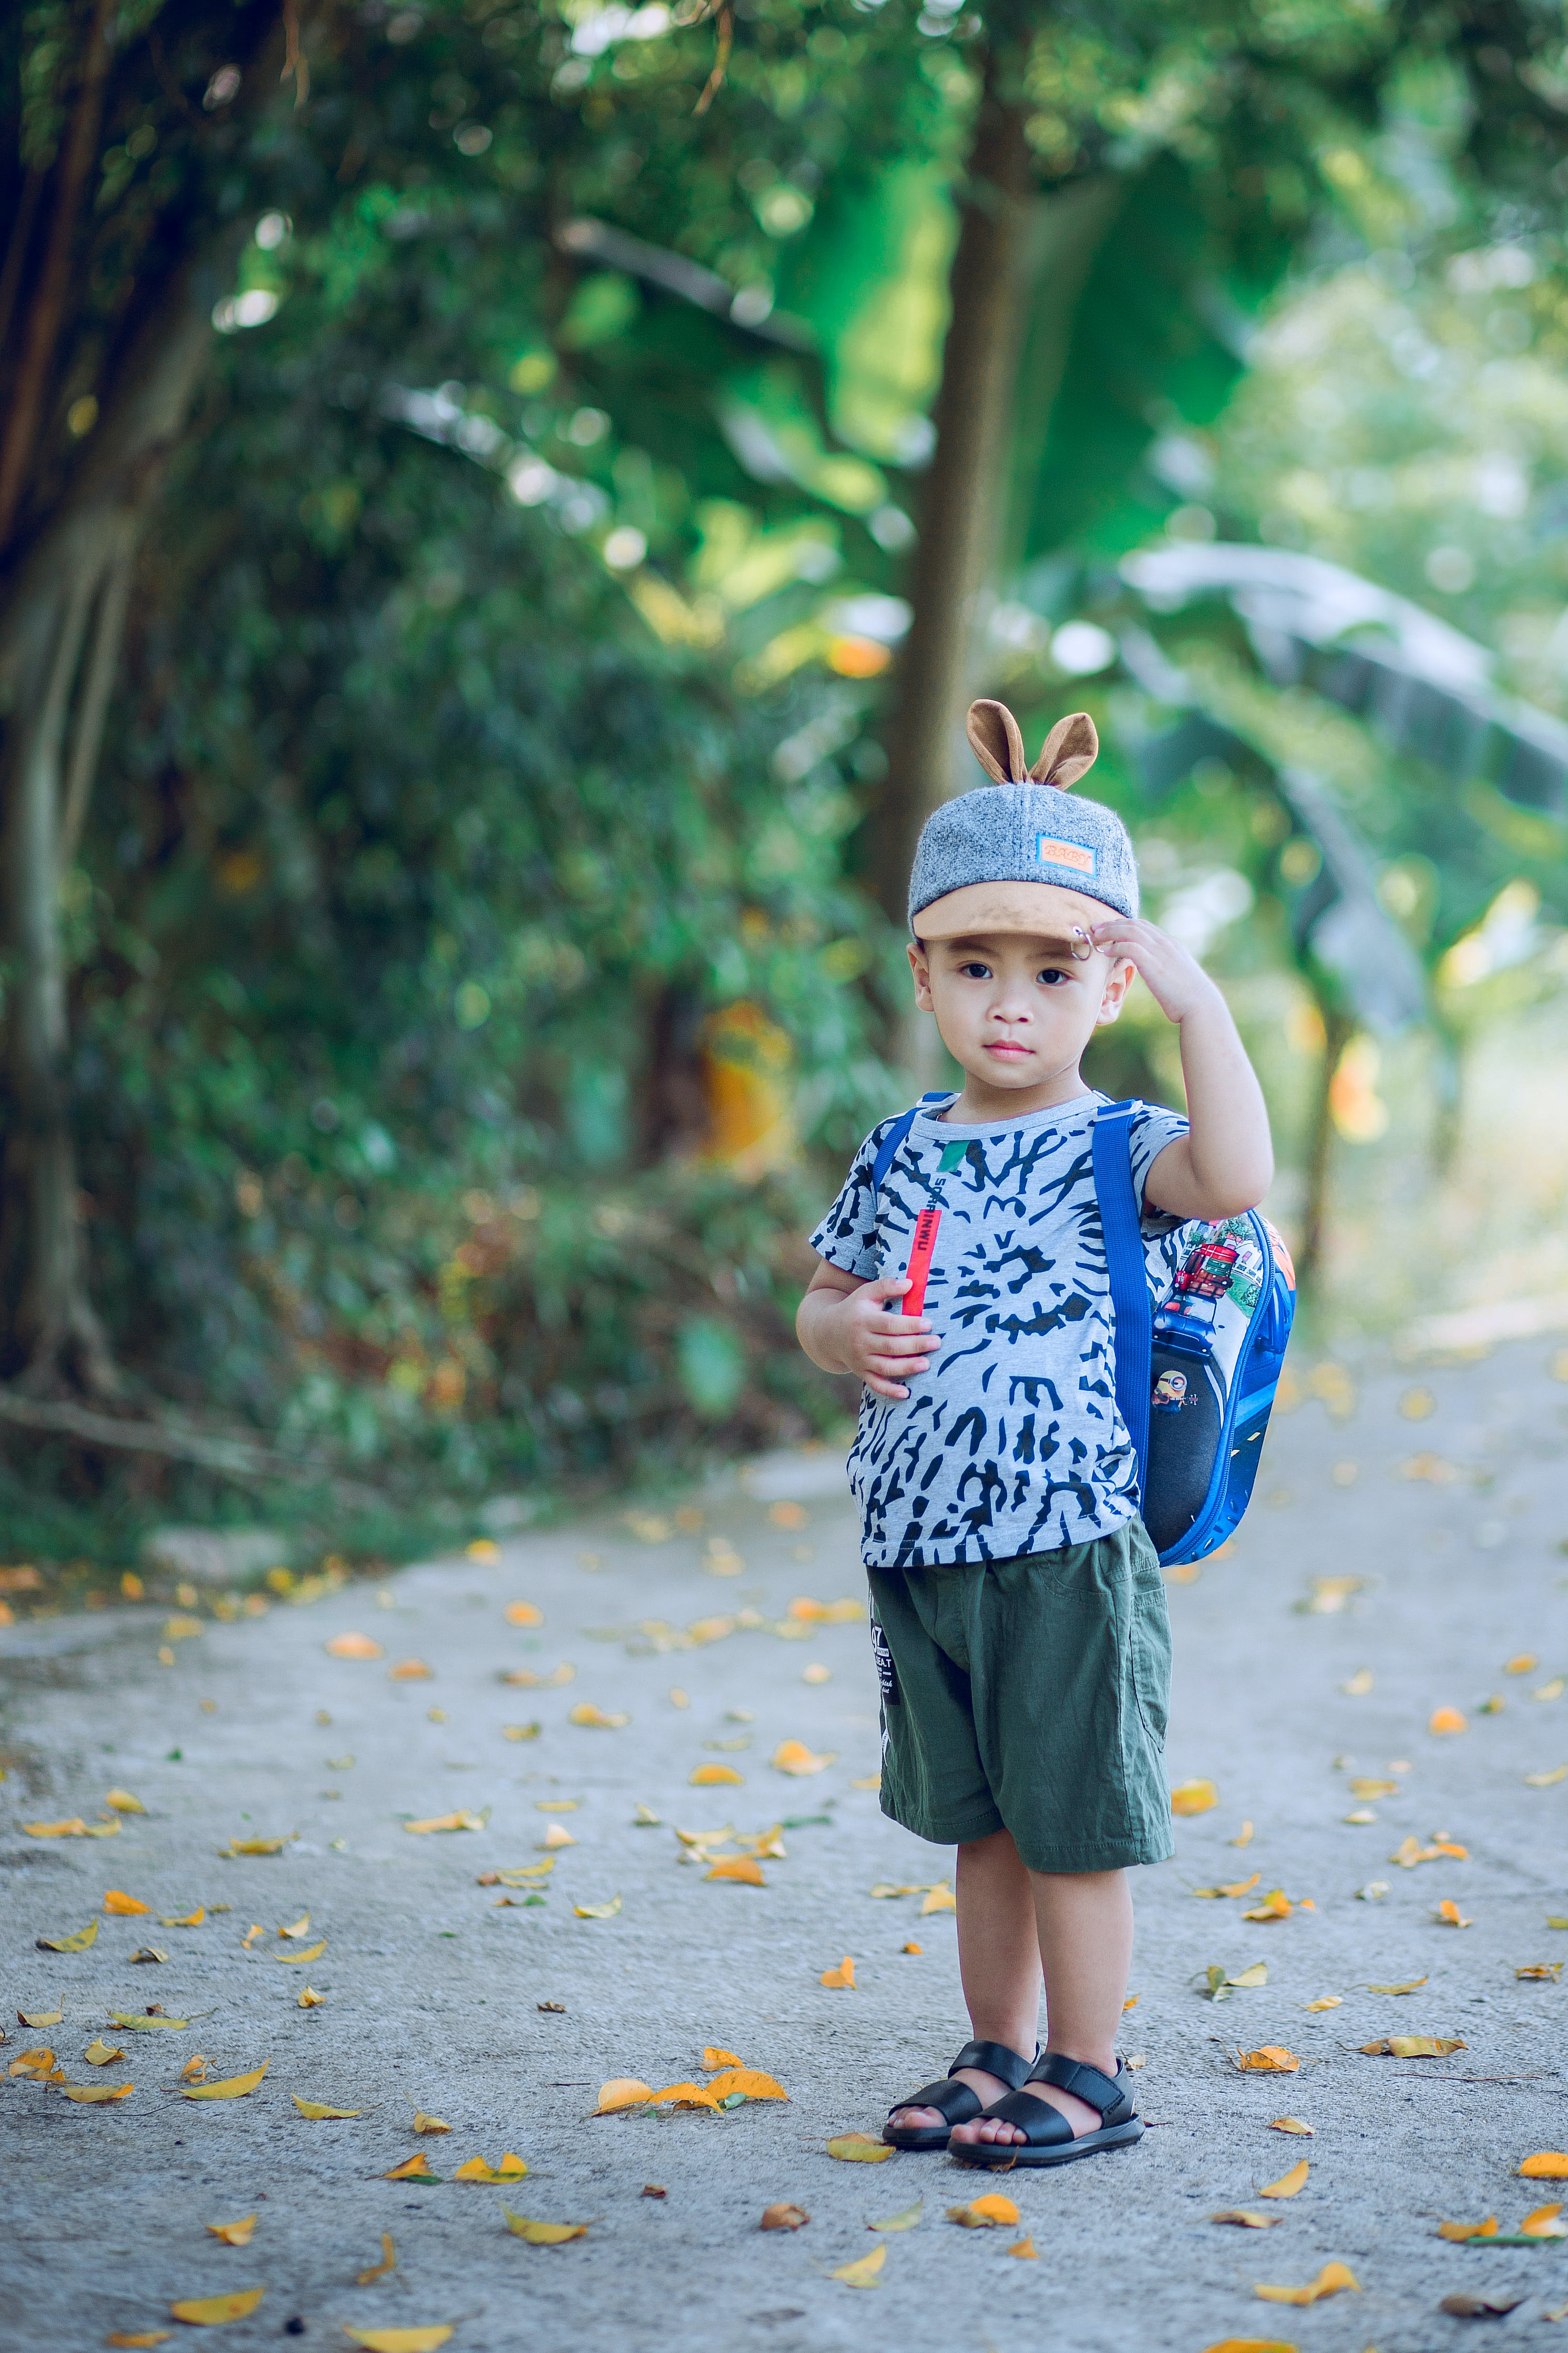 A little boy wearing a decorated T-shirt. | Source: Pexels